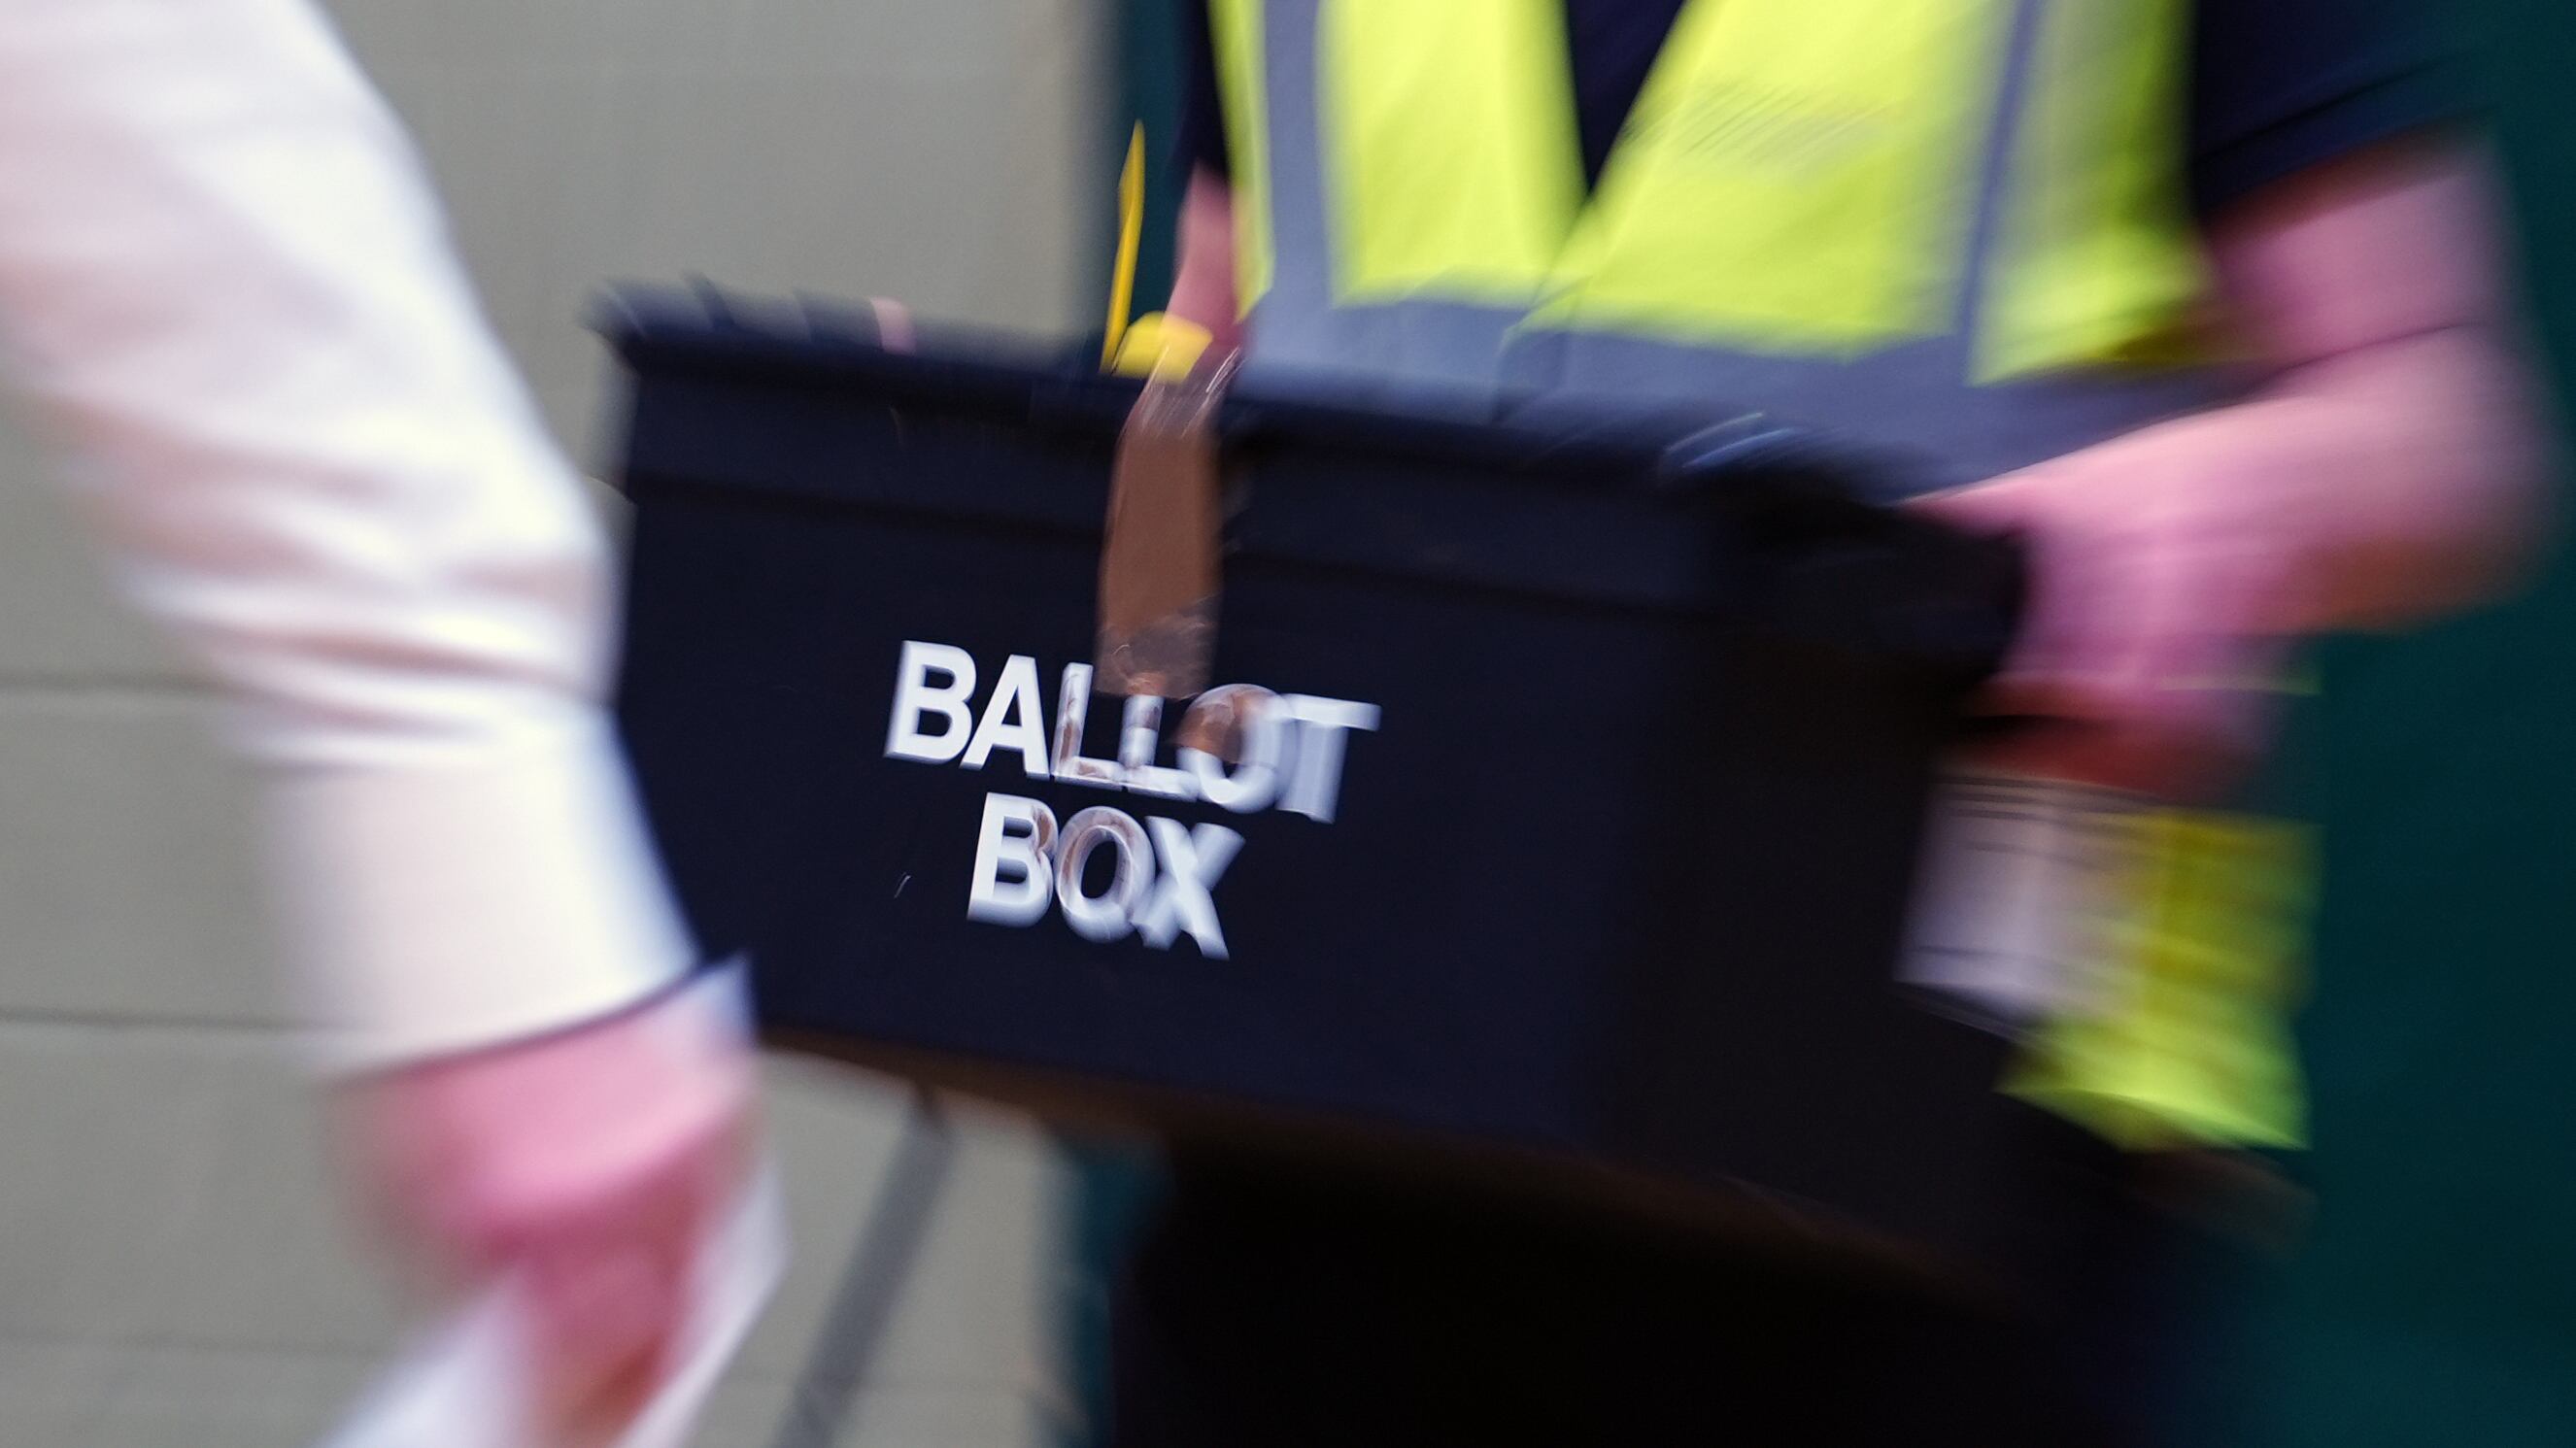 The deadline to register to vote in the General Election is 11.59pm on Tuesday June 18